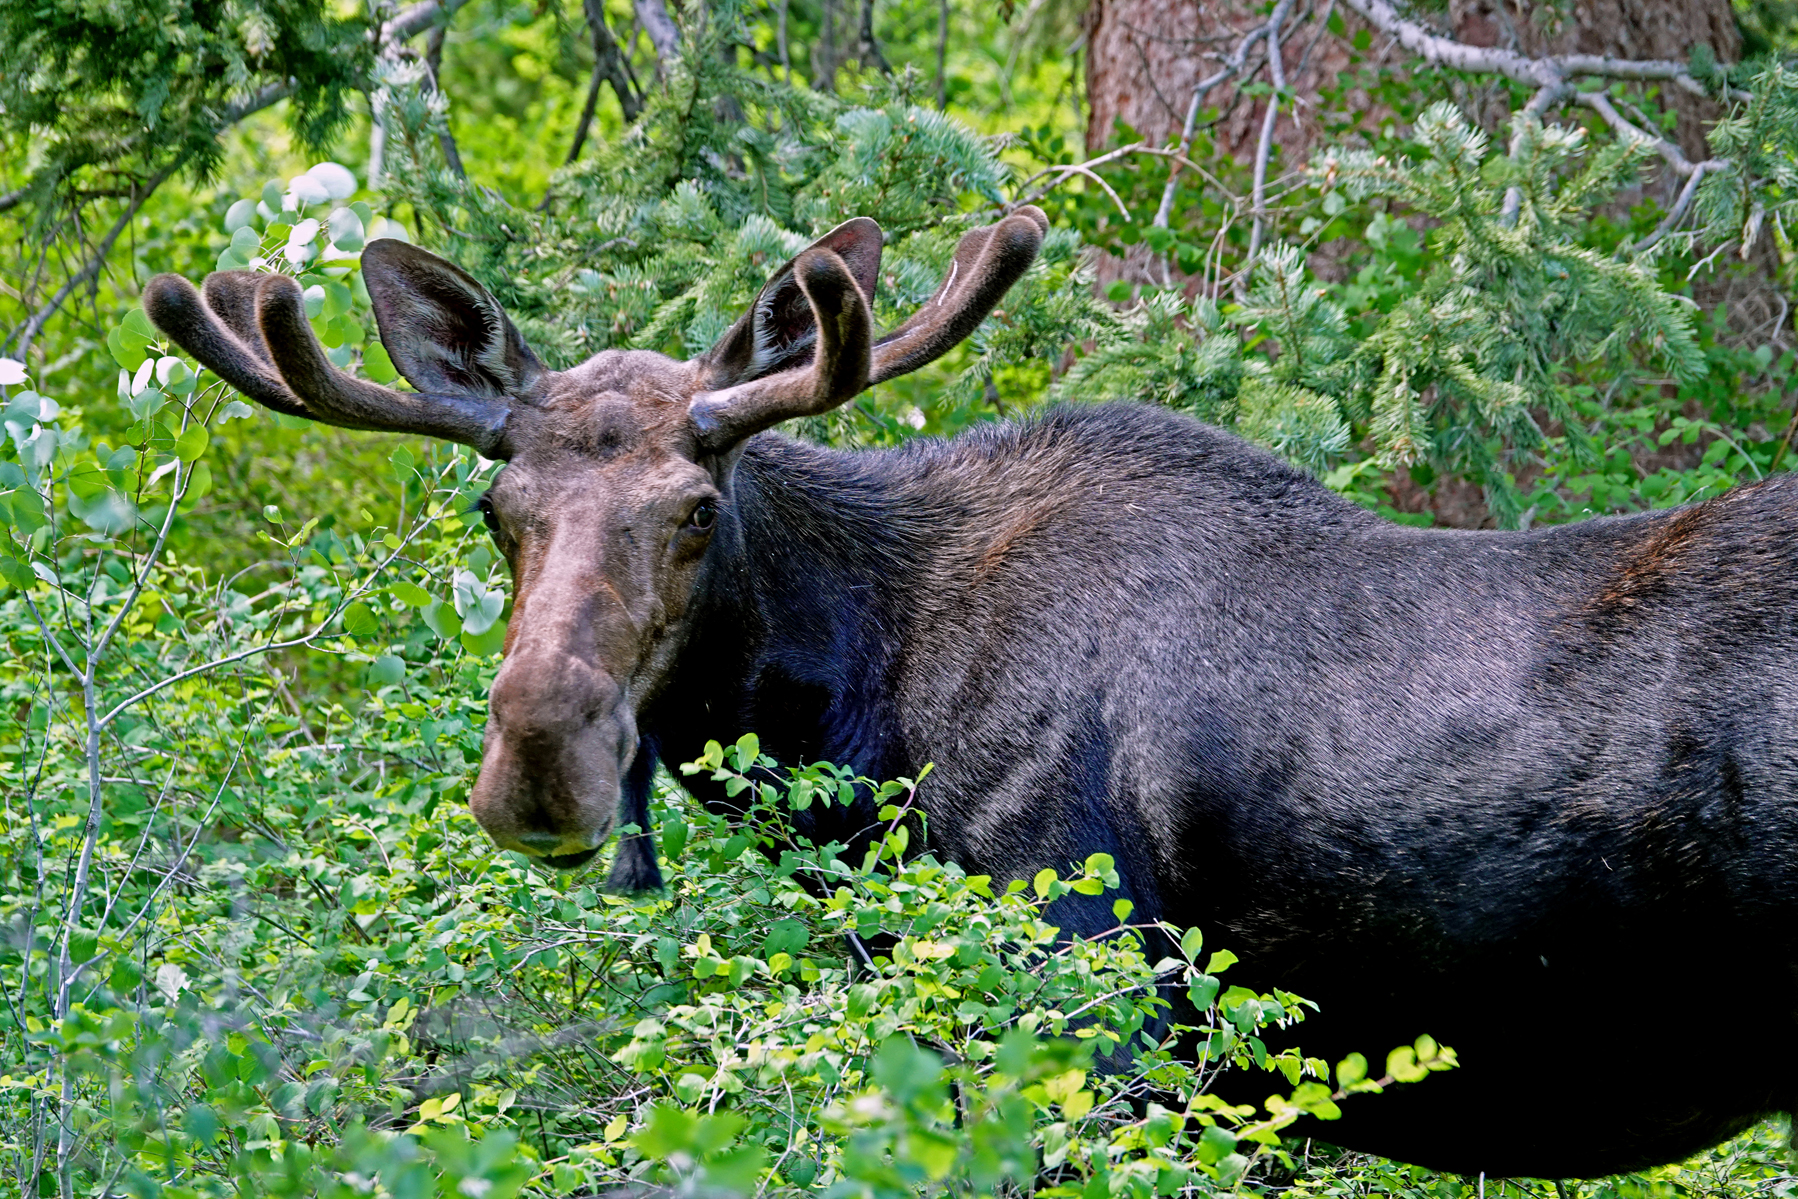 Bull moose  -  Silver Lake Trail, Uinta-Wasatch-Cache National Forest, Utah  